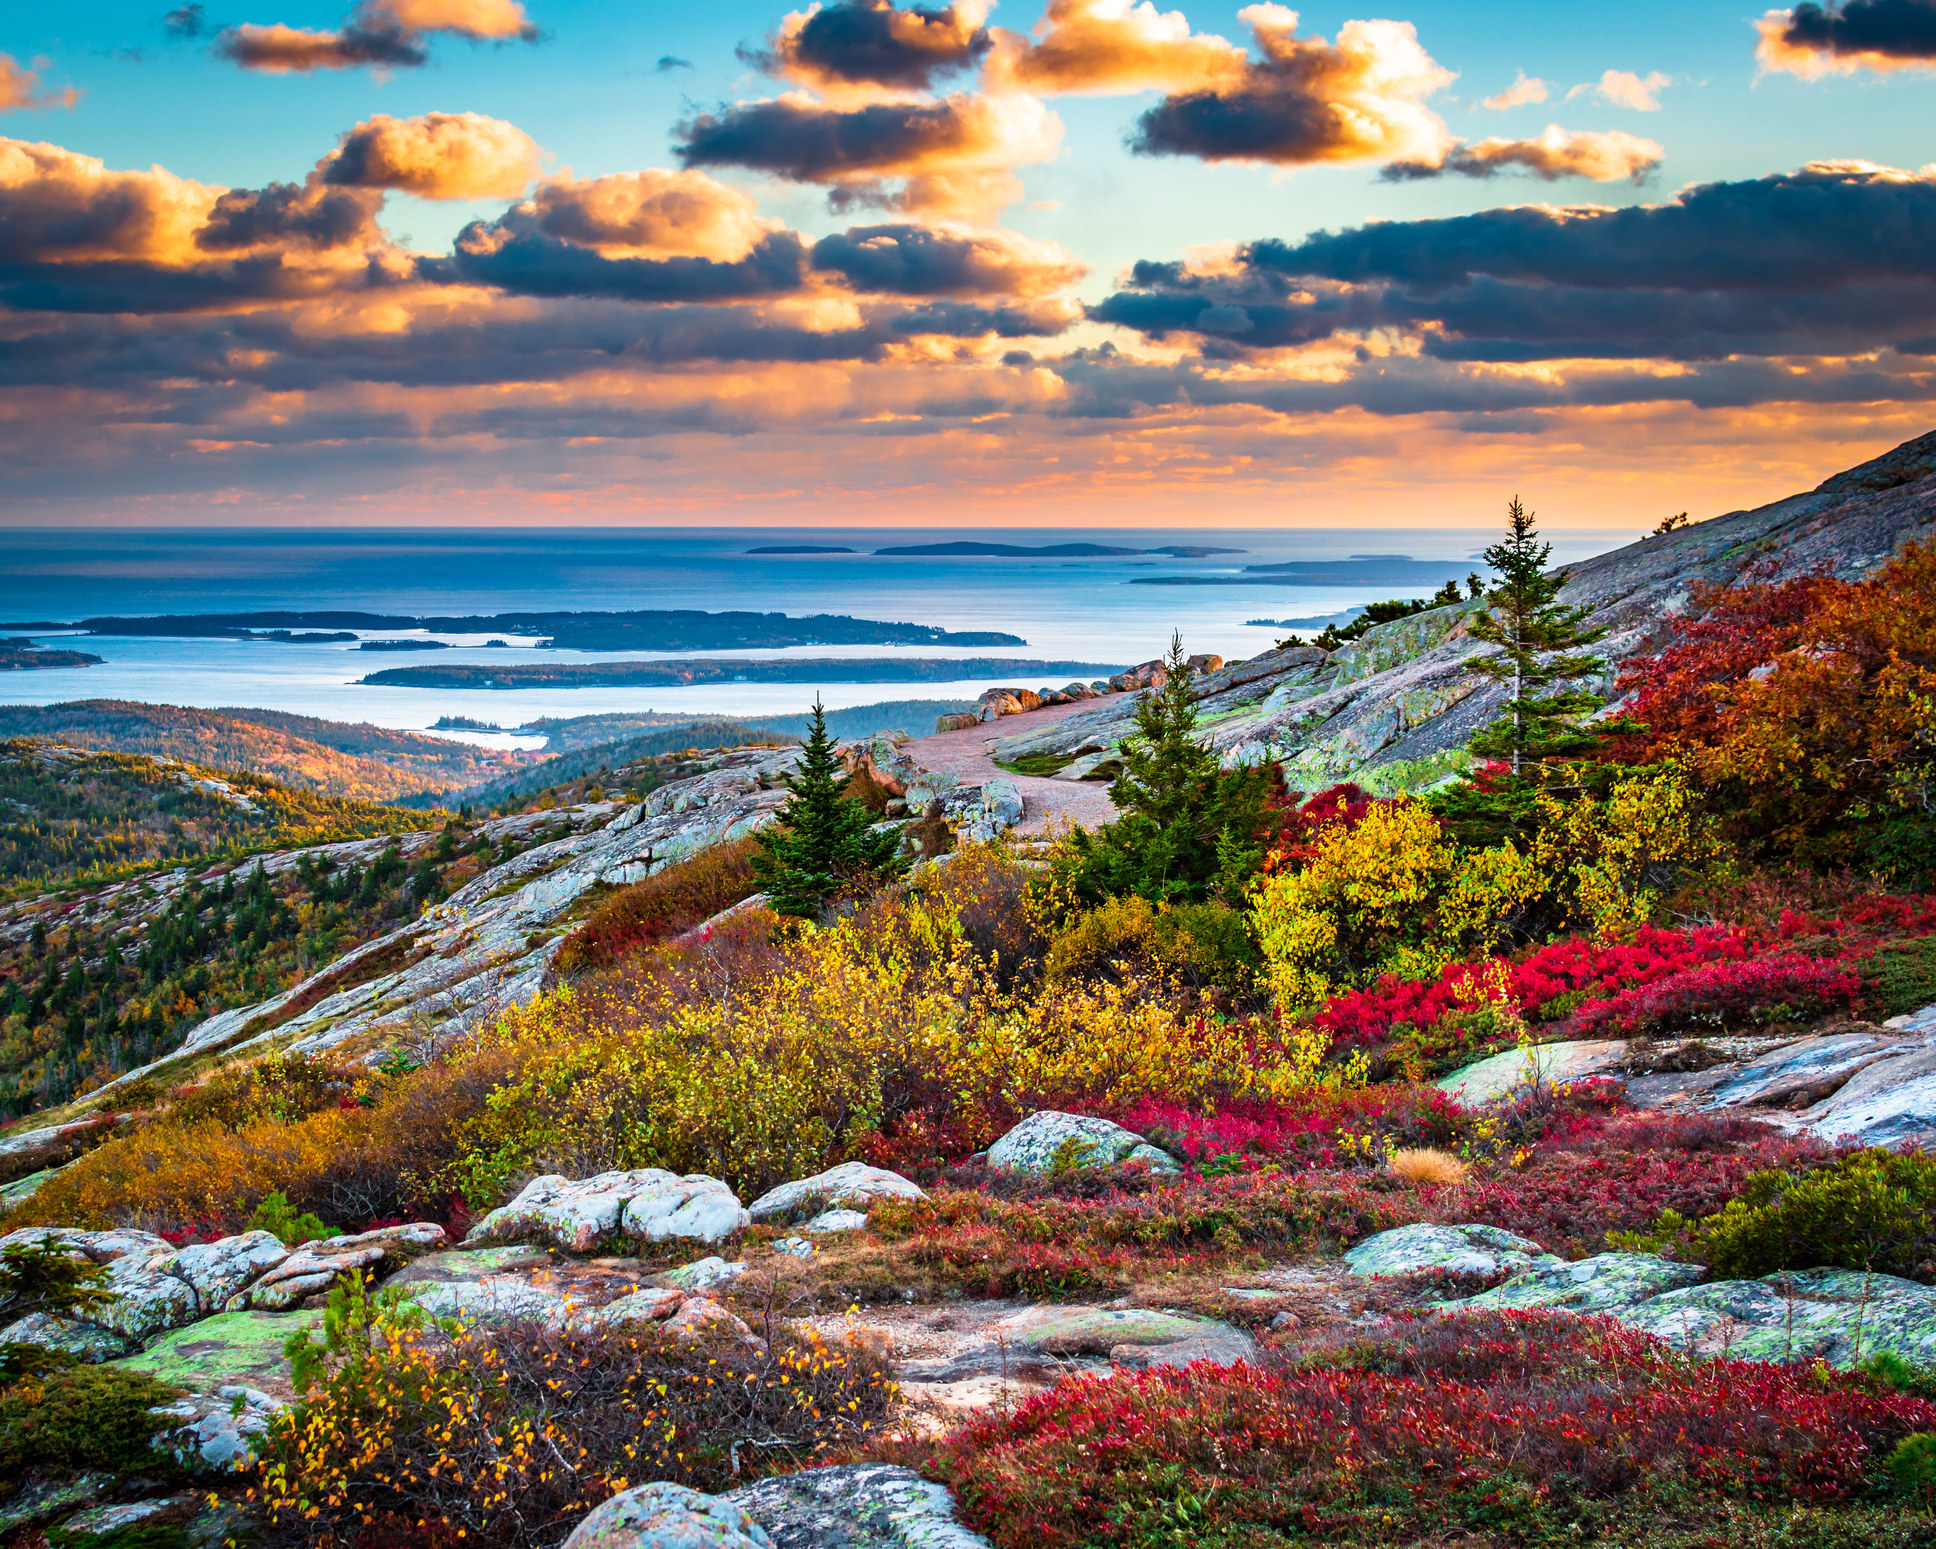 An autumn view from Cadillac Mountain in Acadia National Park in Maine.